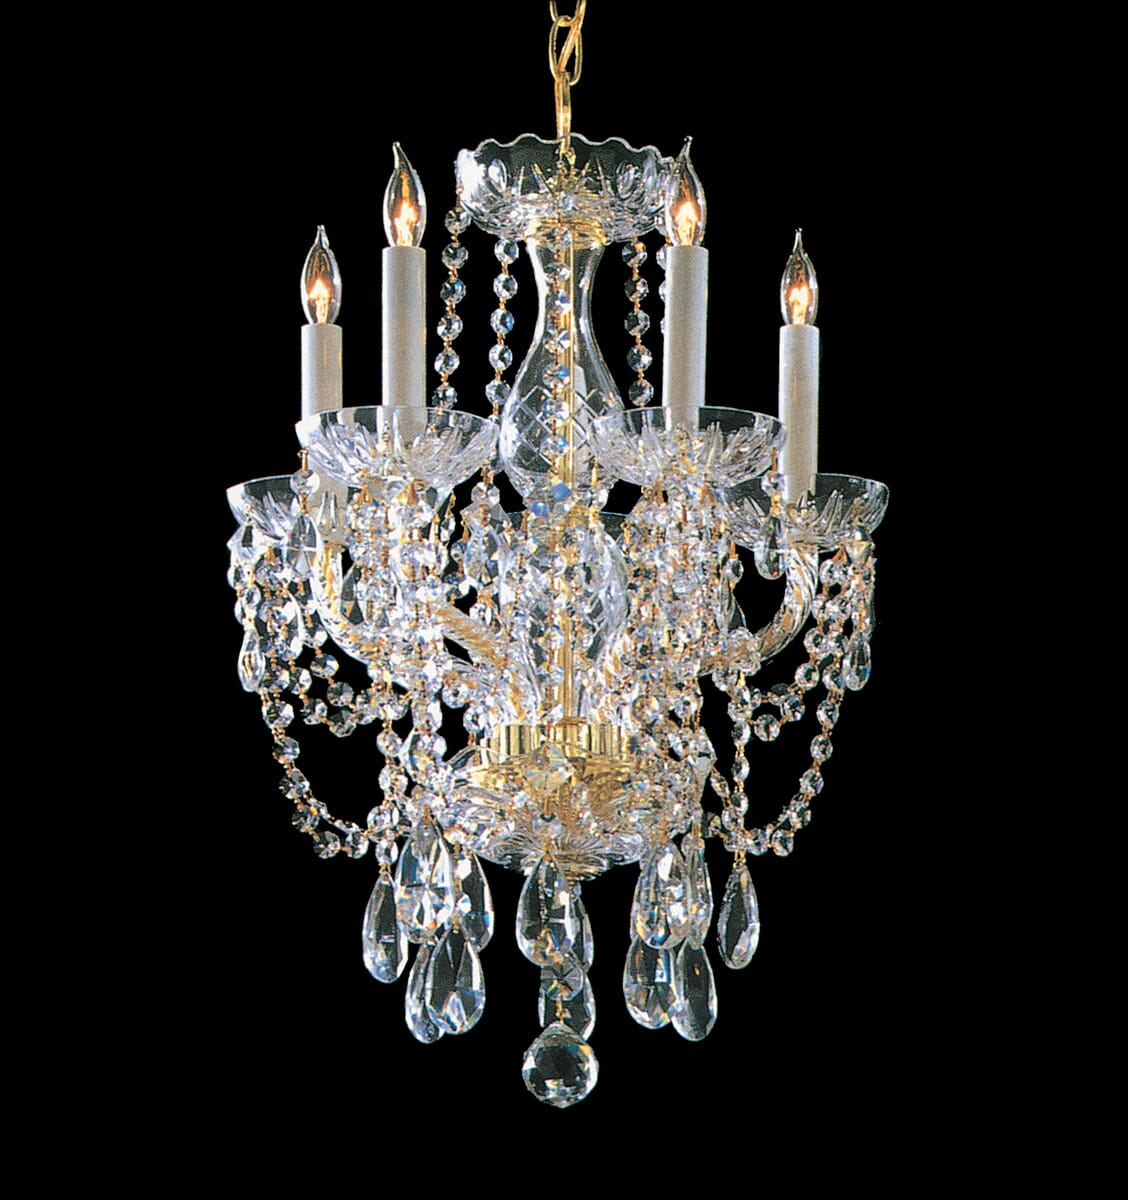 Traditional Crystal 5-Light 20"" Mini Chandelier in Polished Brass with Clear Swarovski Strass Crystals -  Crystorama, 1129-PB-CL-S